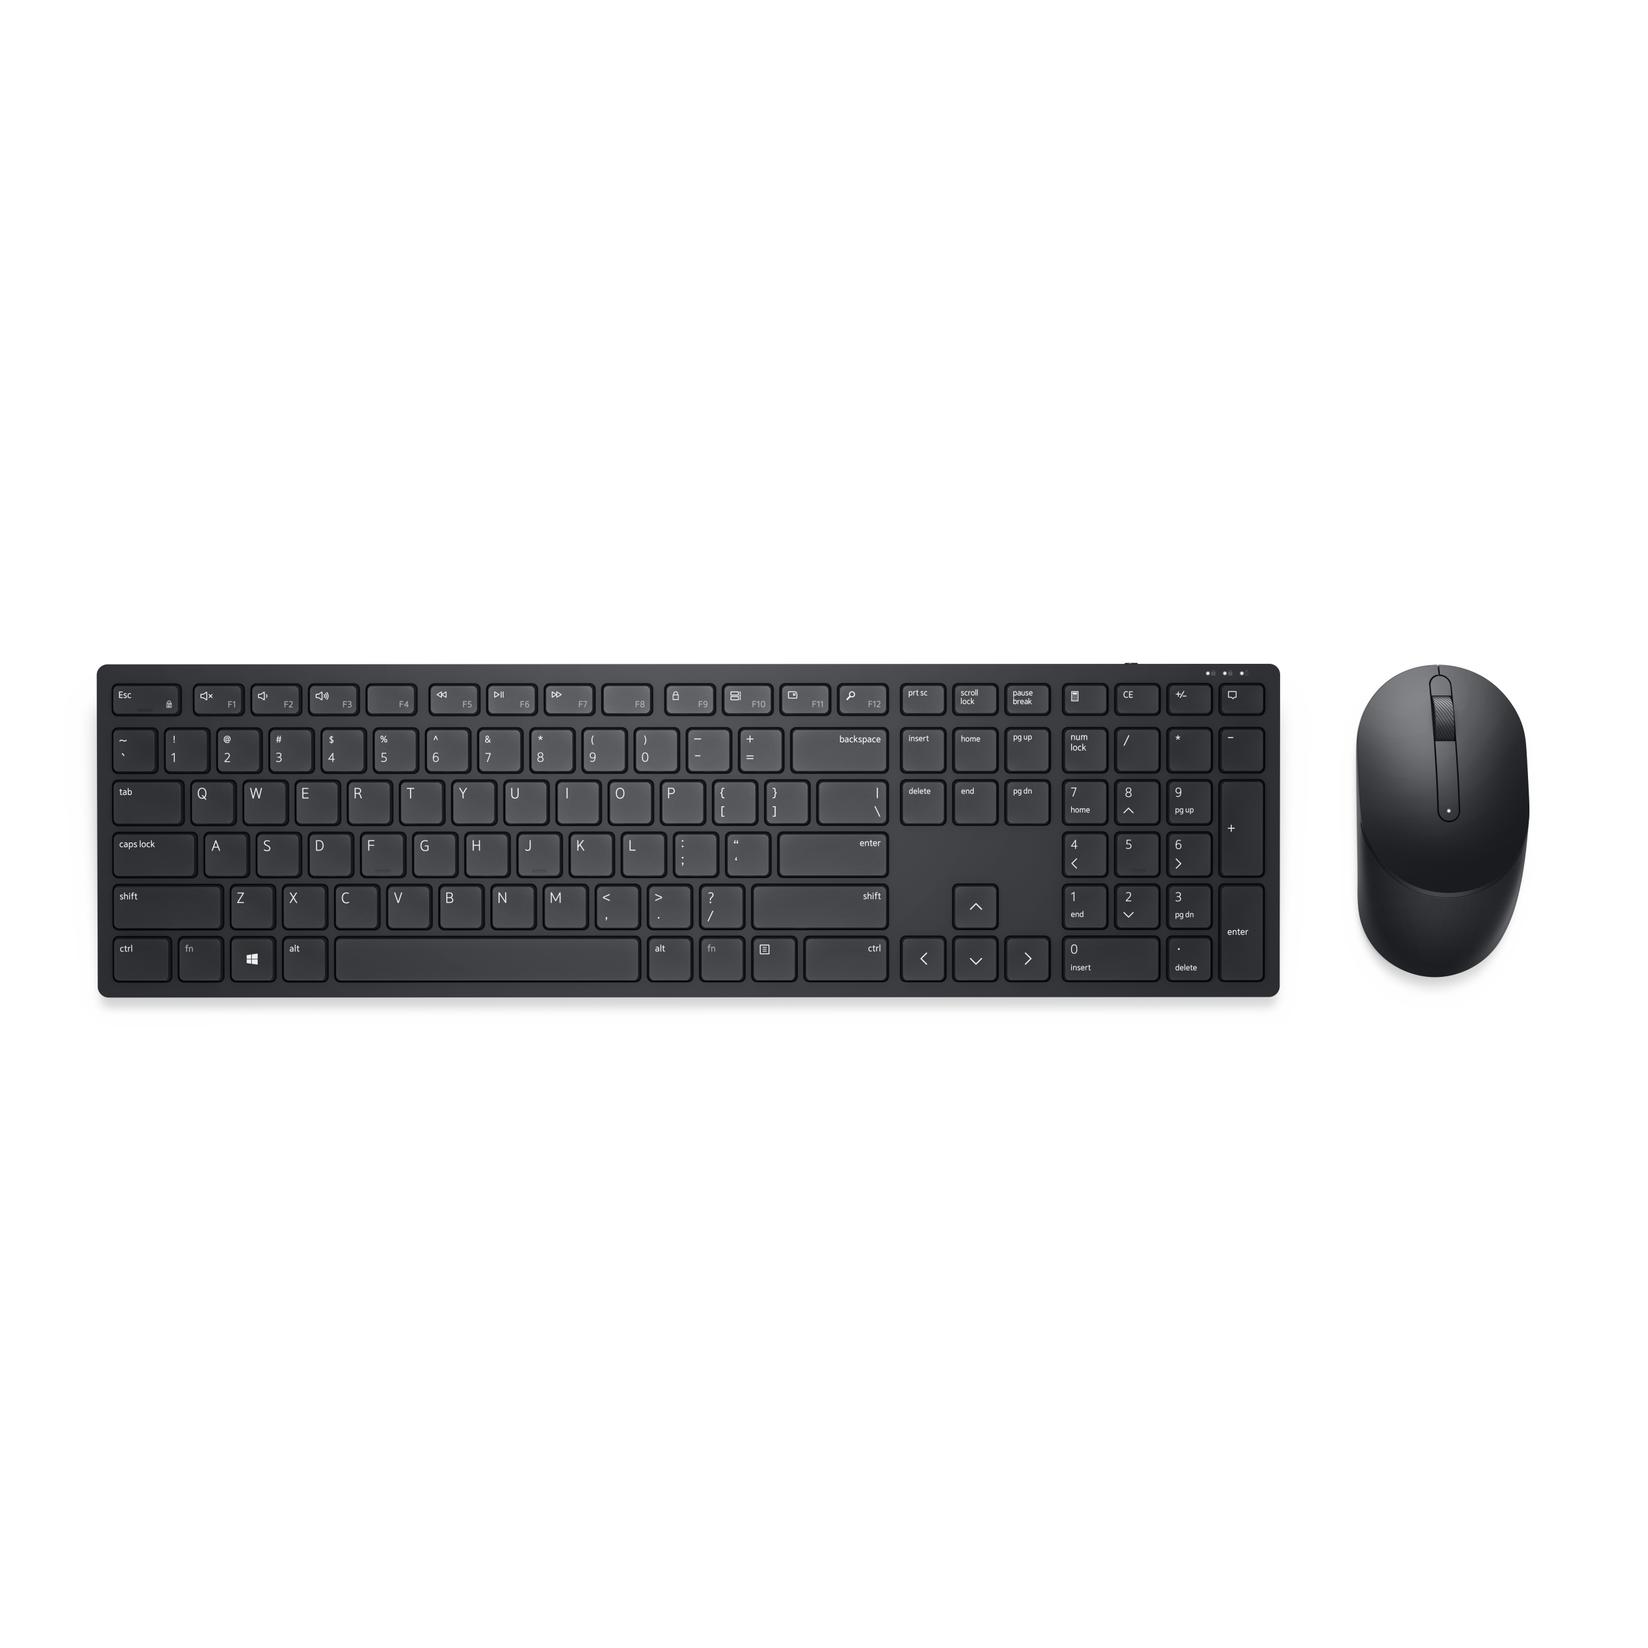 Selected image for Dell KM5221W Pro Wireless US tastatura + miš crna